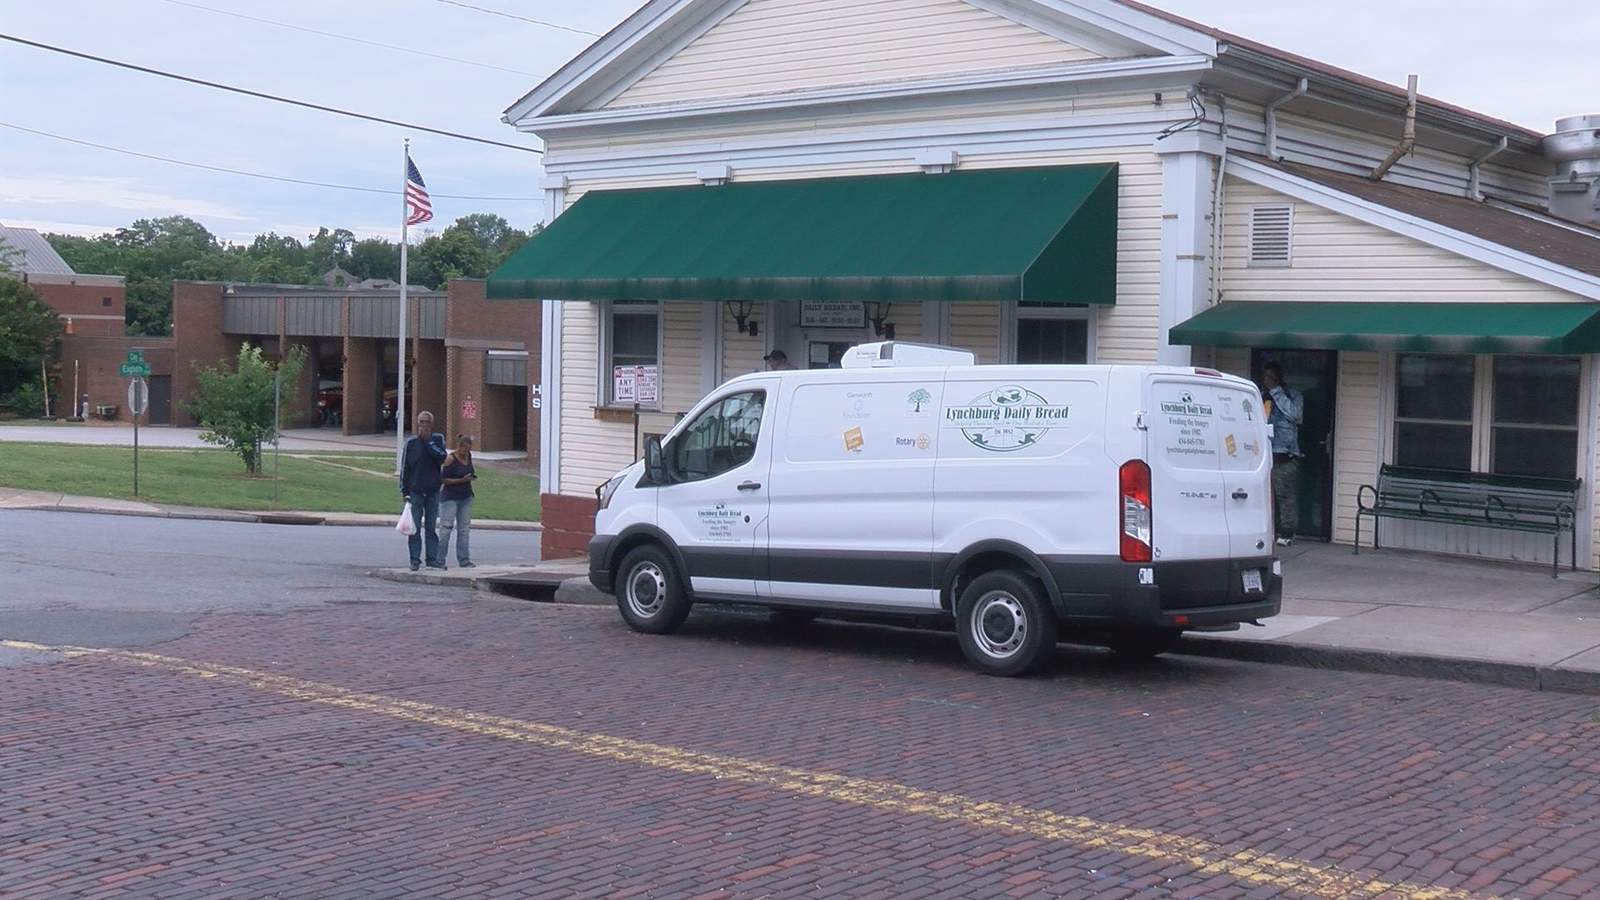 Lynchburg Daily Bread gets new refrigerator van to help deliver food